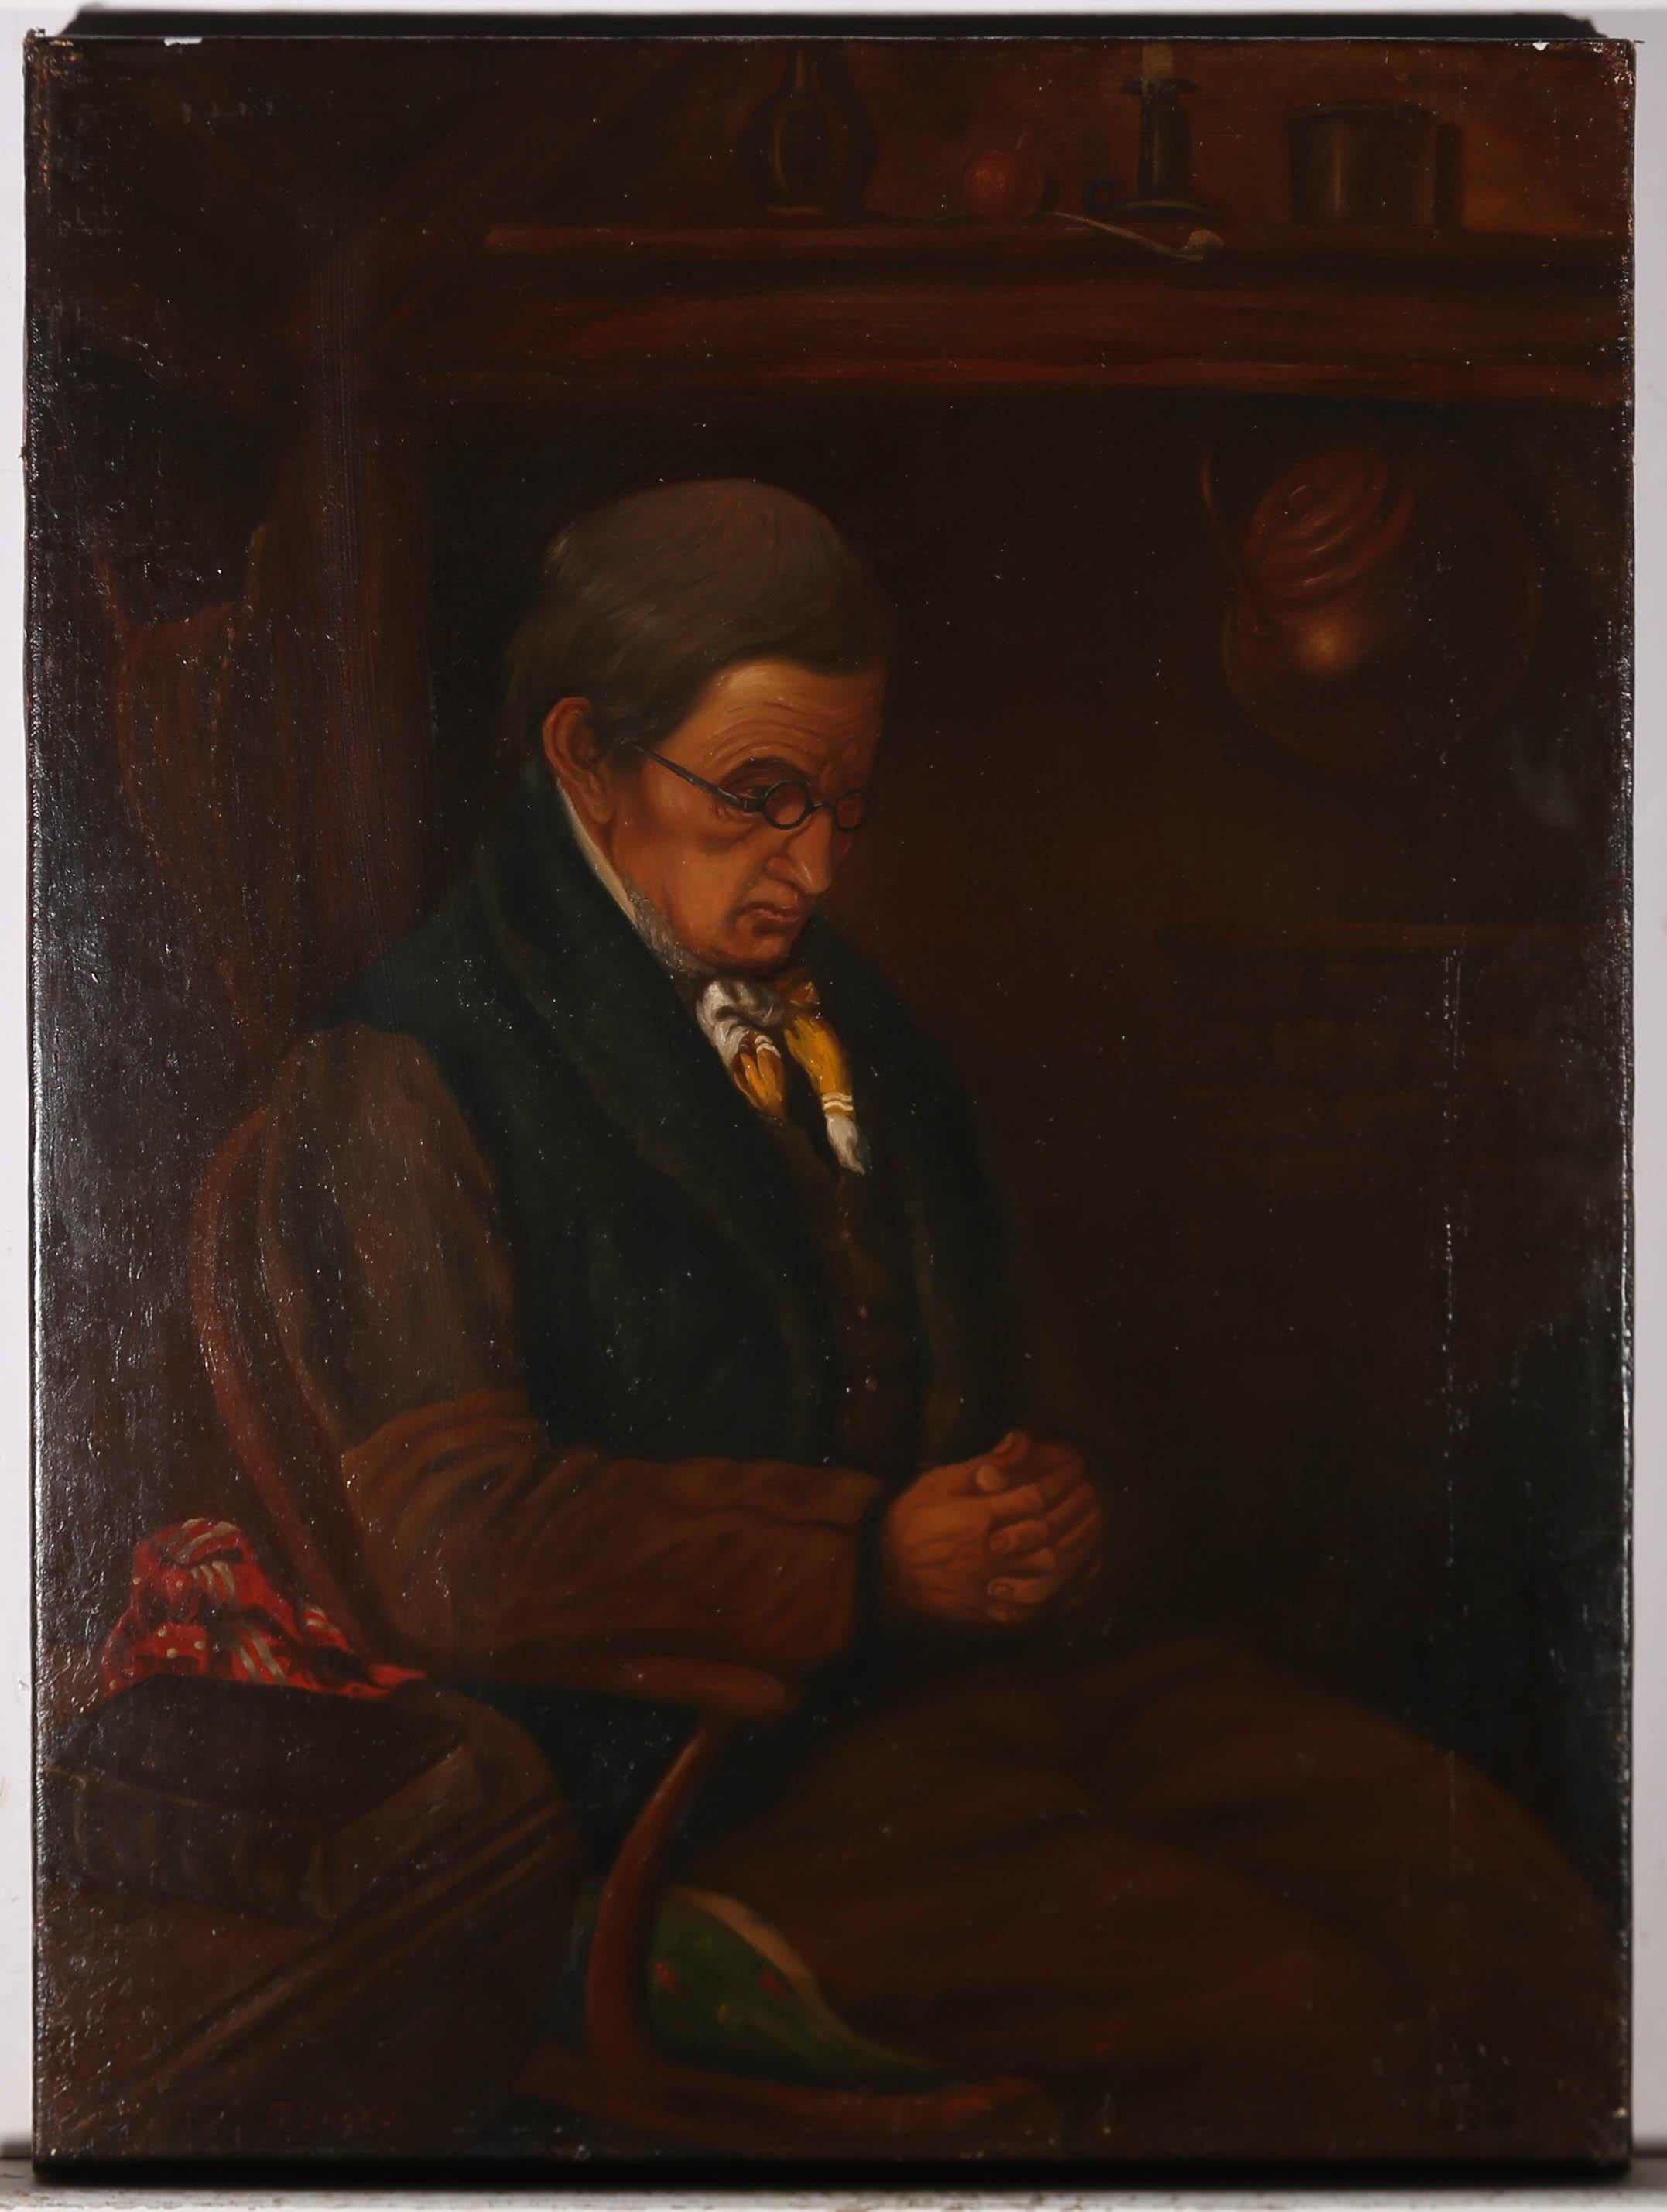 A charming portrait of a gentleman seated in his favourite chair beside a large fireplace. Household trinkets line the mantelpiece and a clay pipe can be seen just out of reach. His quiet demeanour suggests he is just about to fall asleep. Signed to